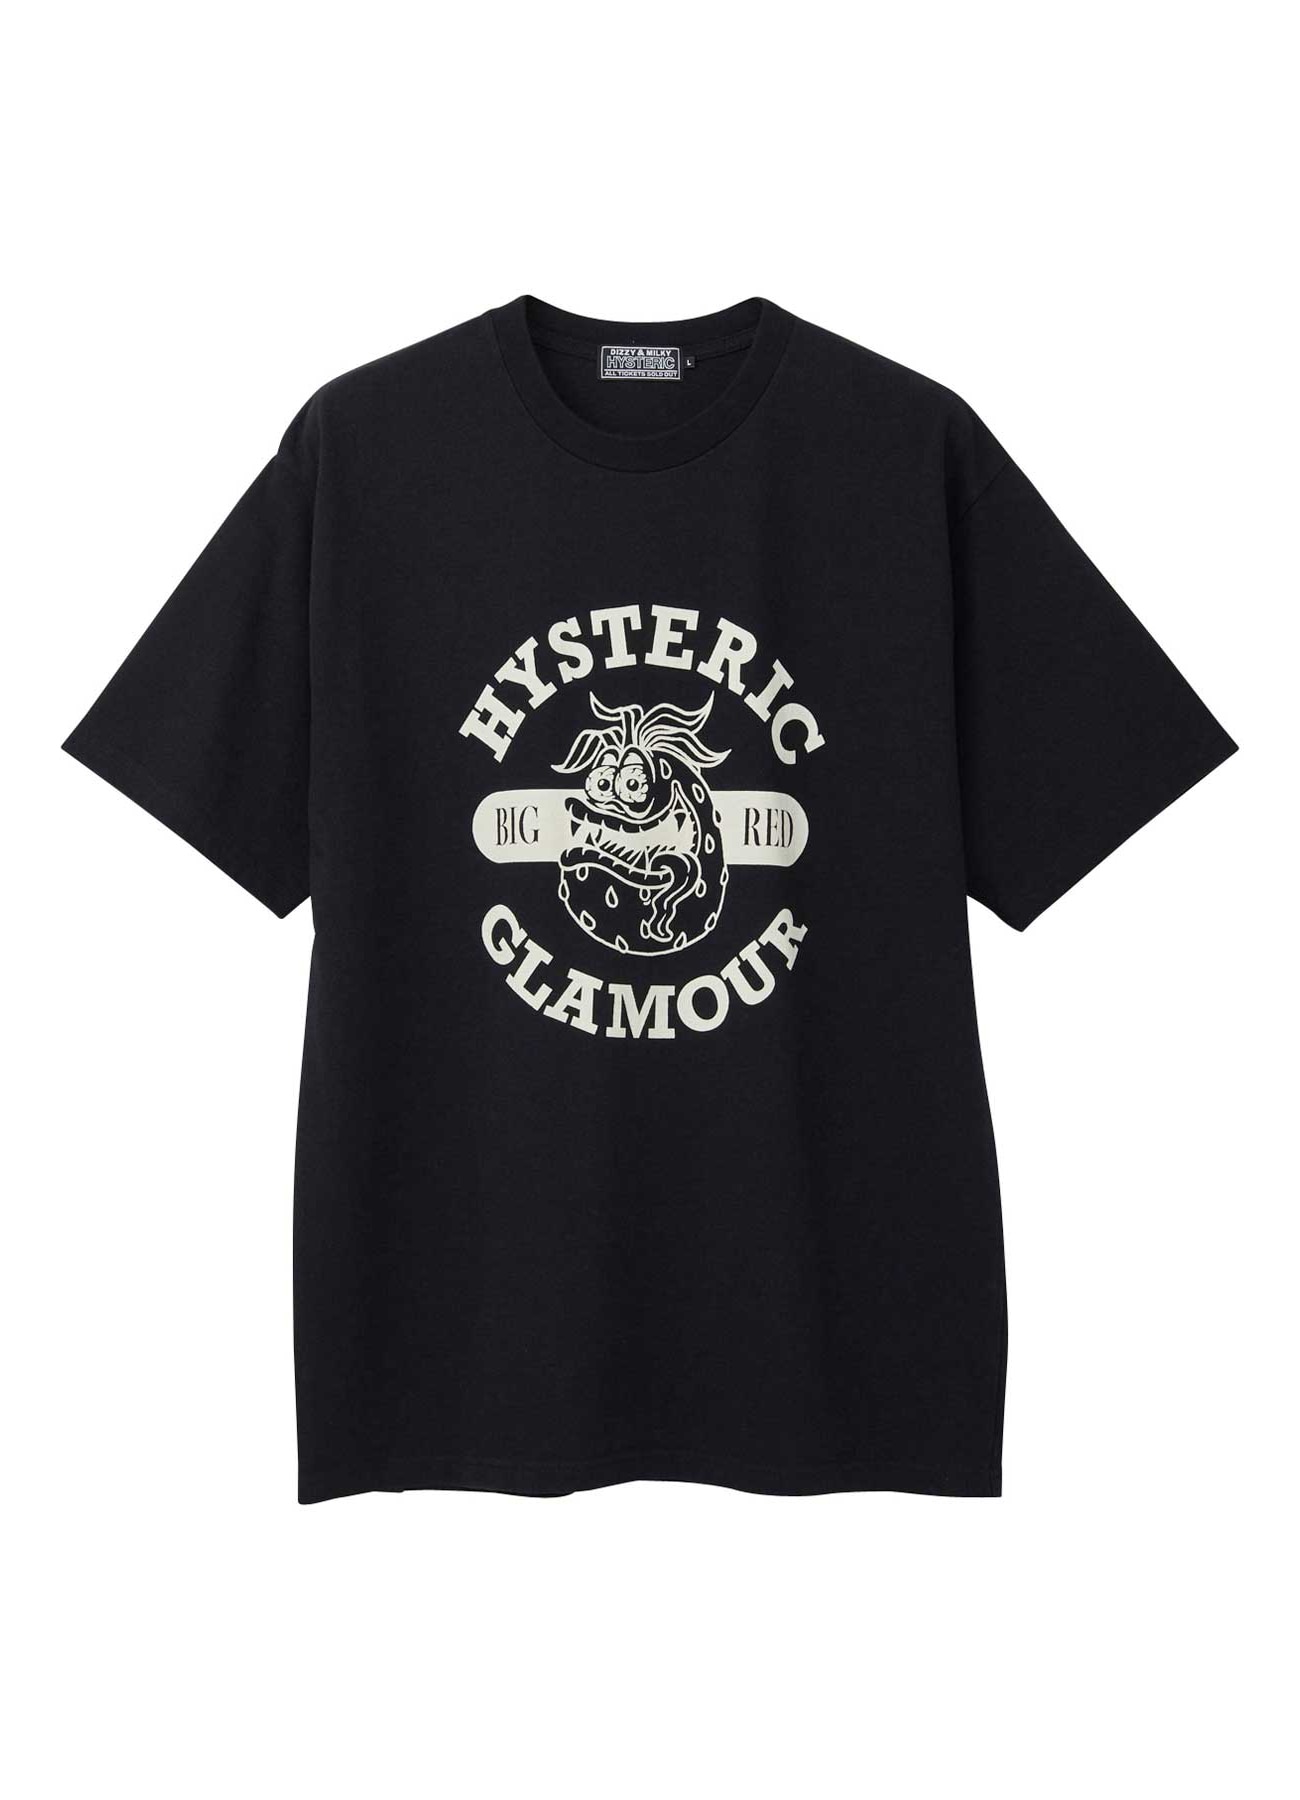 WILDSIDE × HYSTERIC GLAMOUR Tシャツ XL 限定 - メンズ